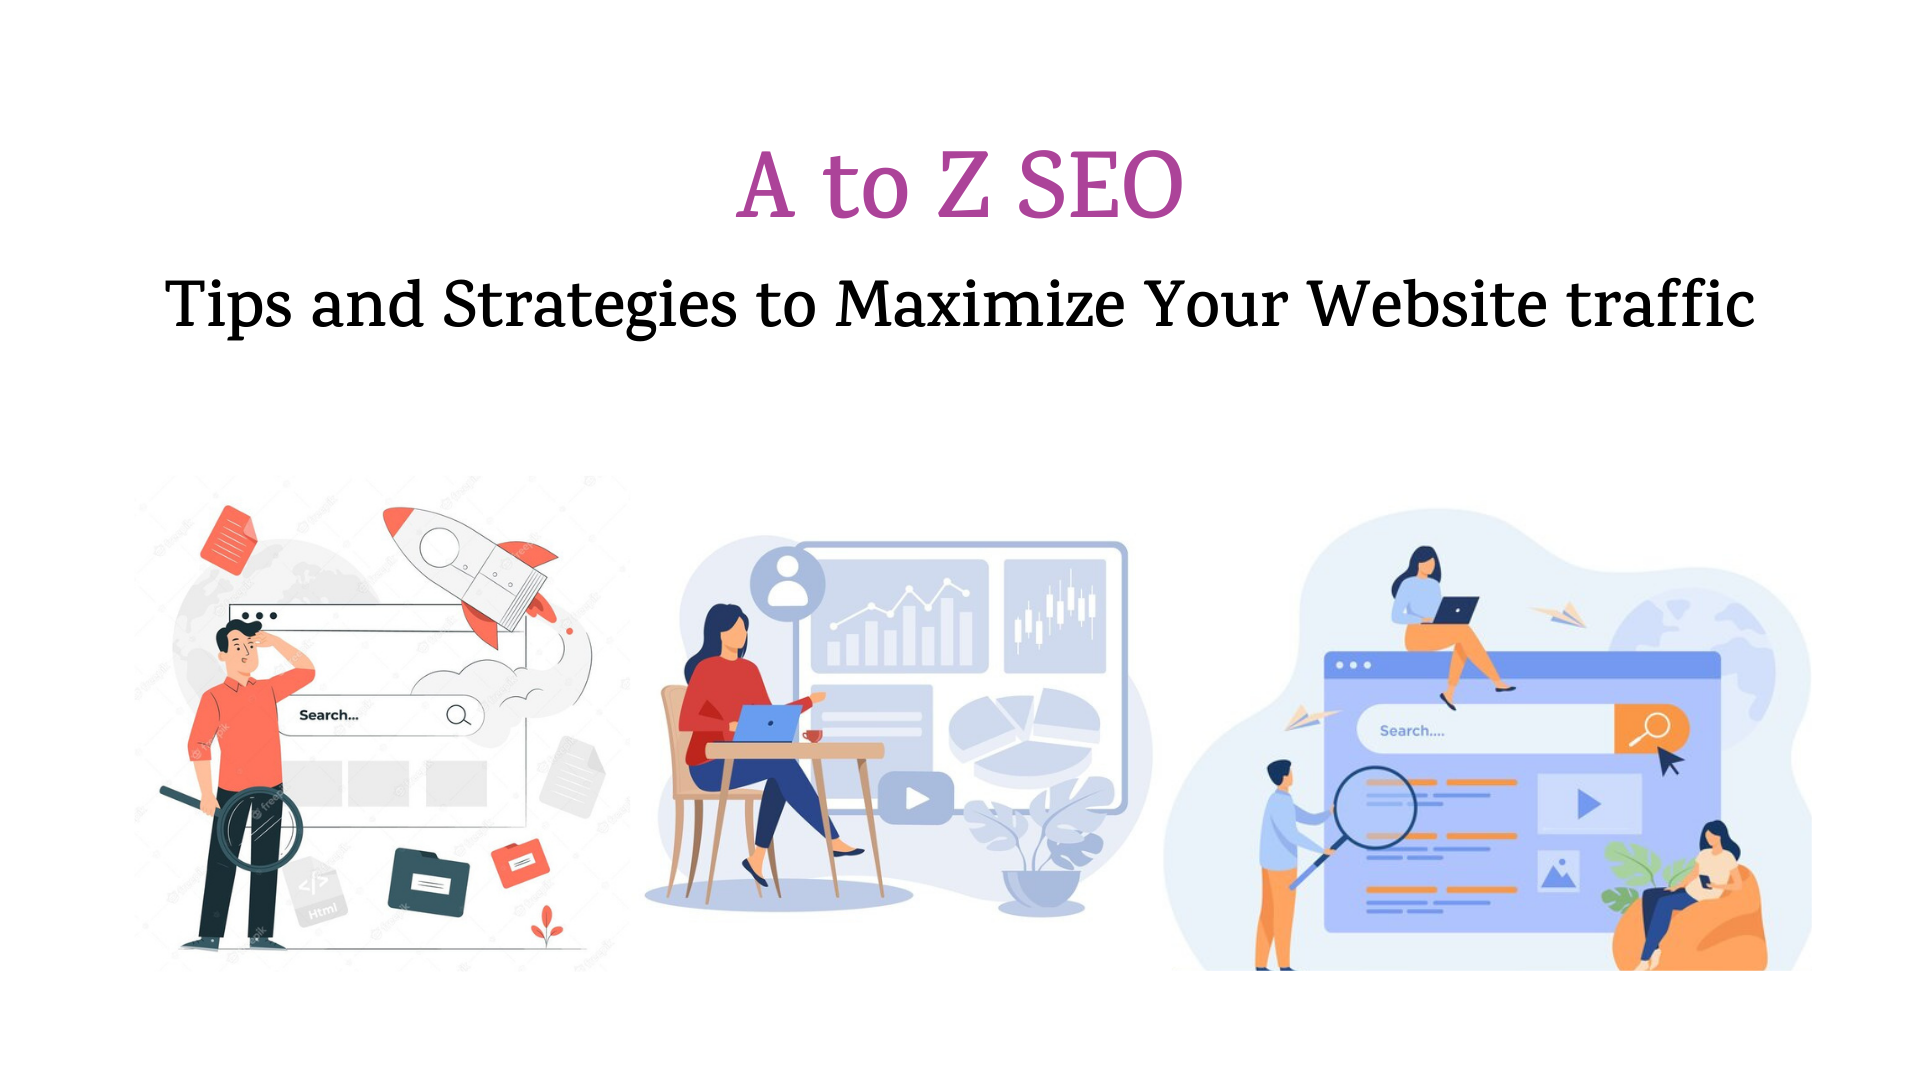 A to Z SEO: Tips and Strategies to Maximize Your Website traffic